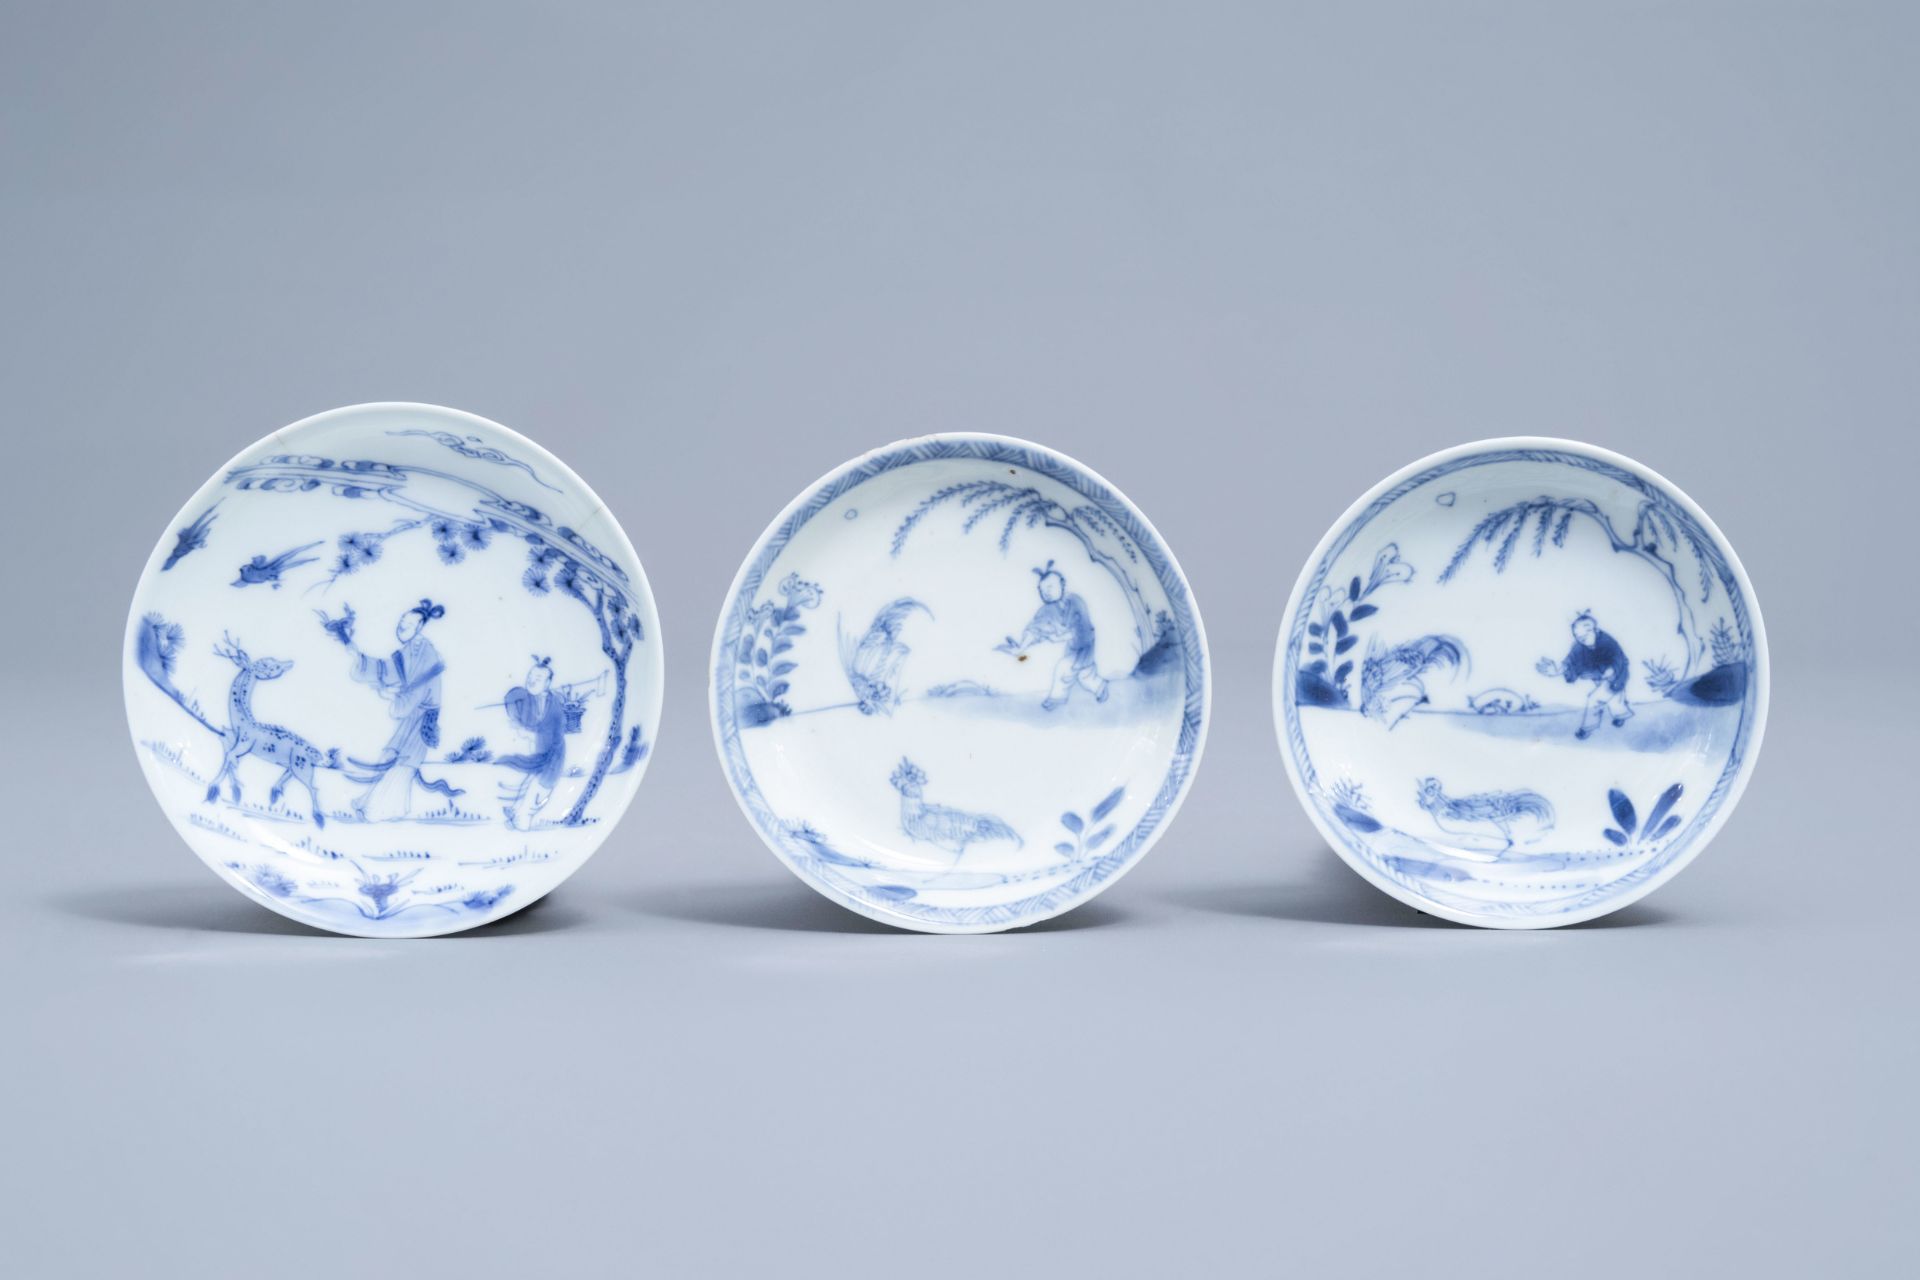 A varied collection of Chinese blue and white porcelain, 18th C. and later - Image 44 of 54